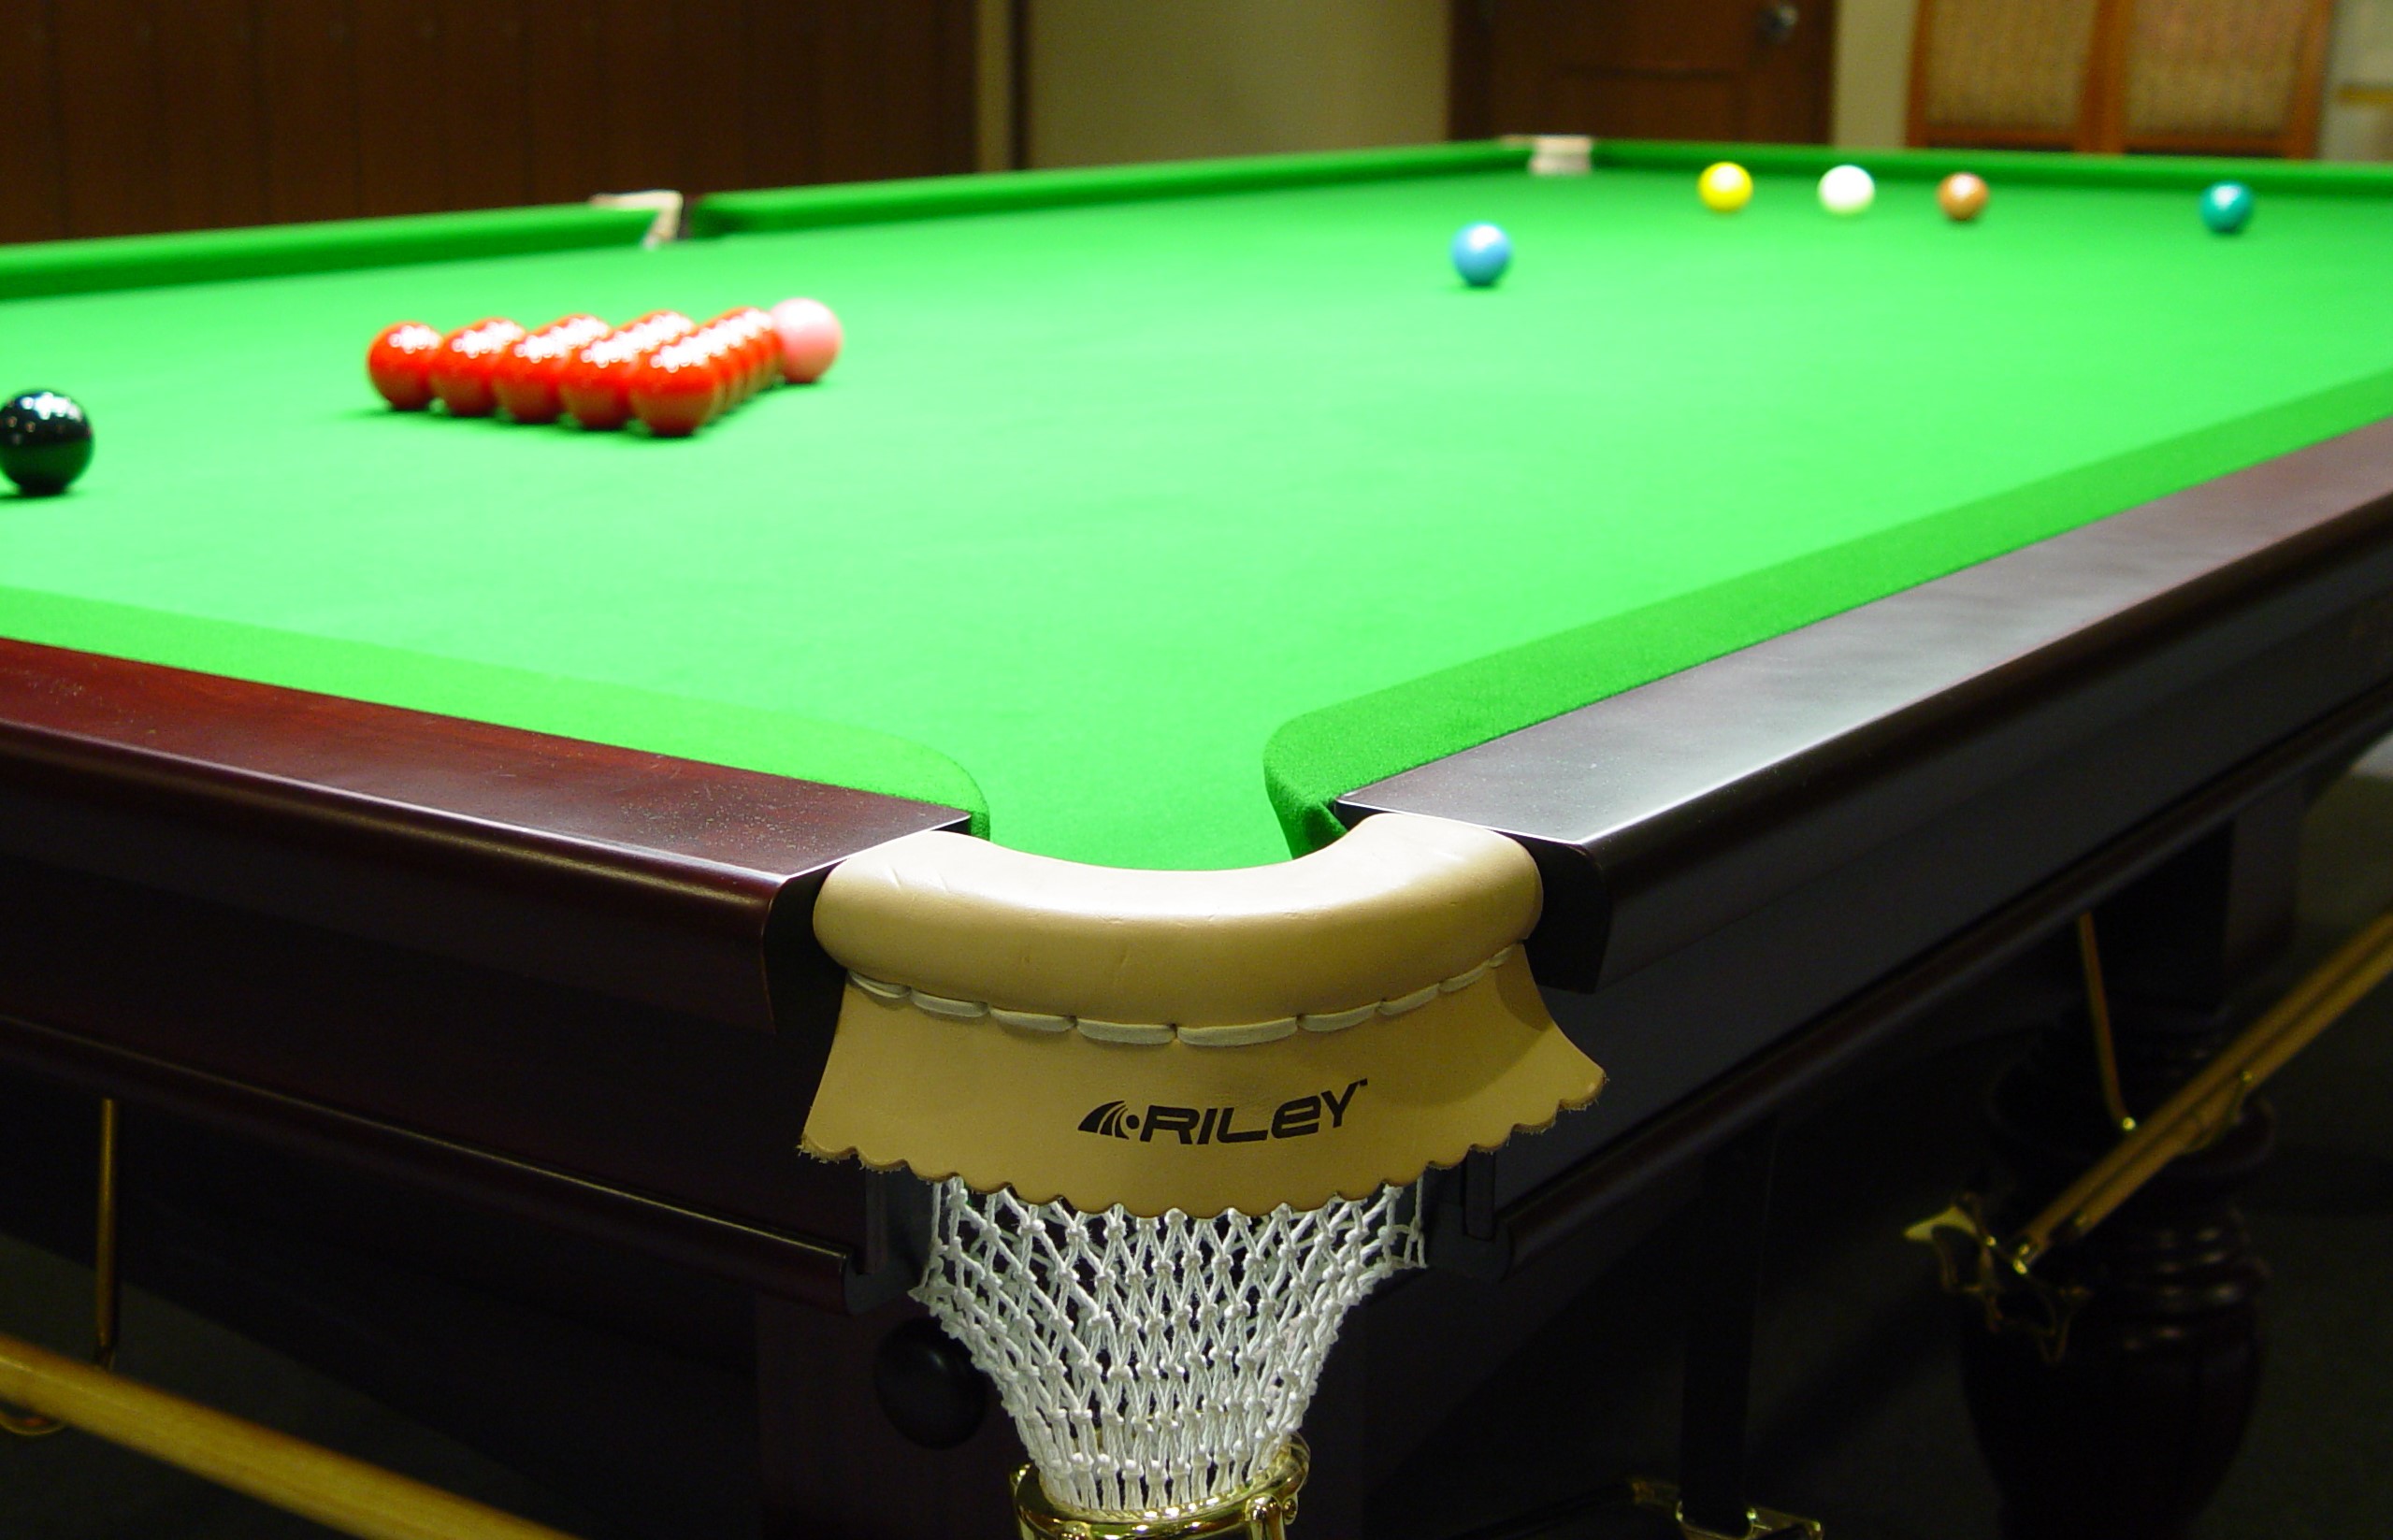 Wales and WSA member Welsh Snooker shine bright on the baize at the U17 World Snooker Championships